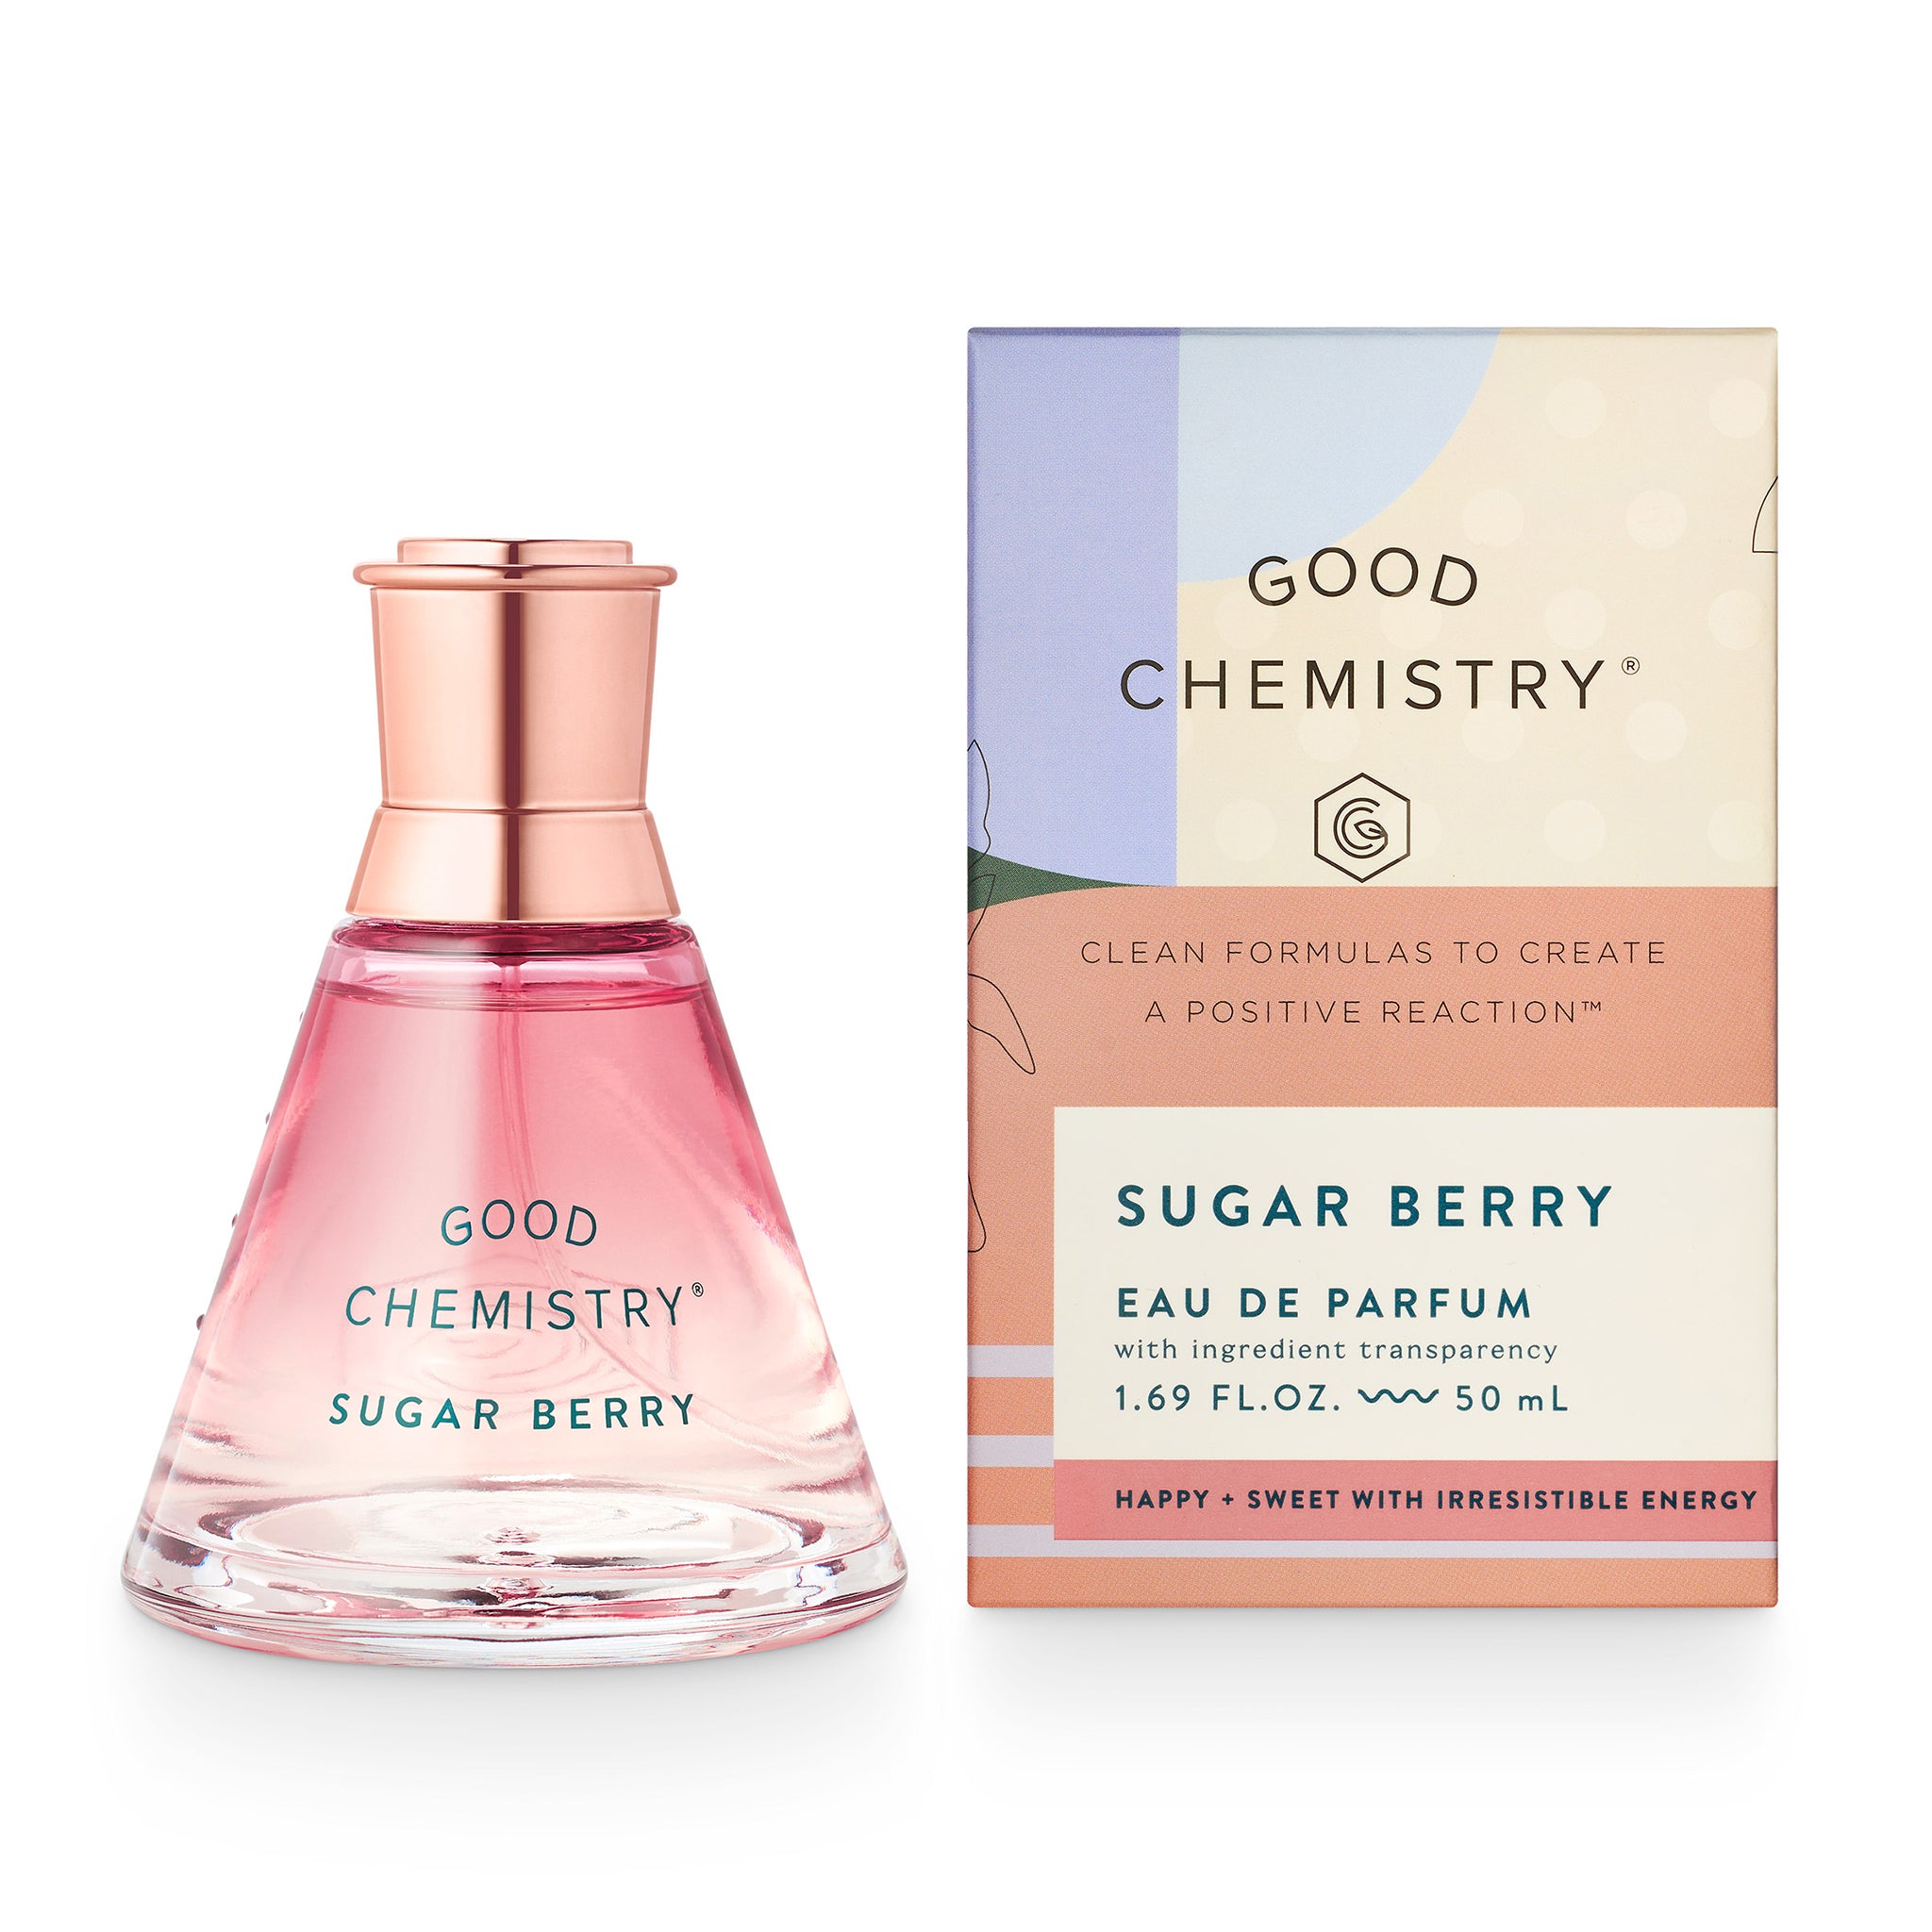 Just in! Good Chemistry Eau De Parfum #queenbee #sugarberry Come in for a  test. This could be your new fall fragrance. Made with essential…